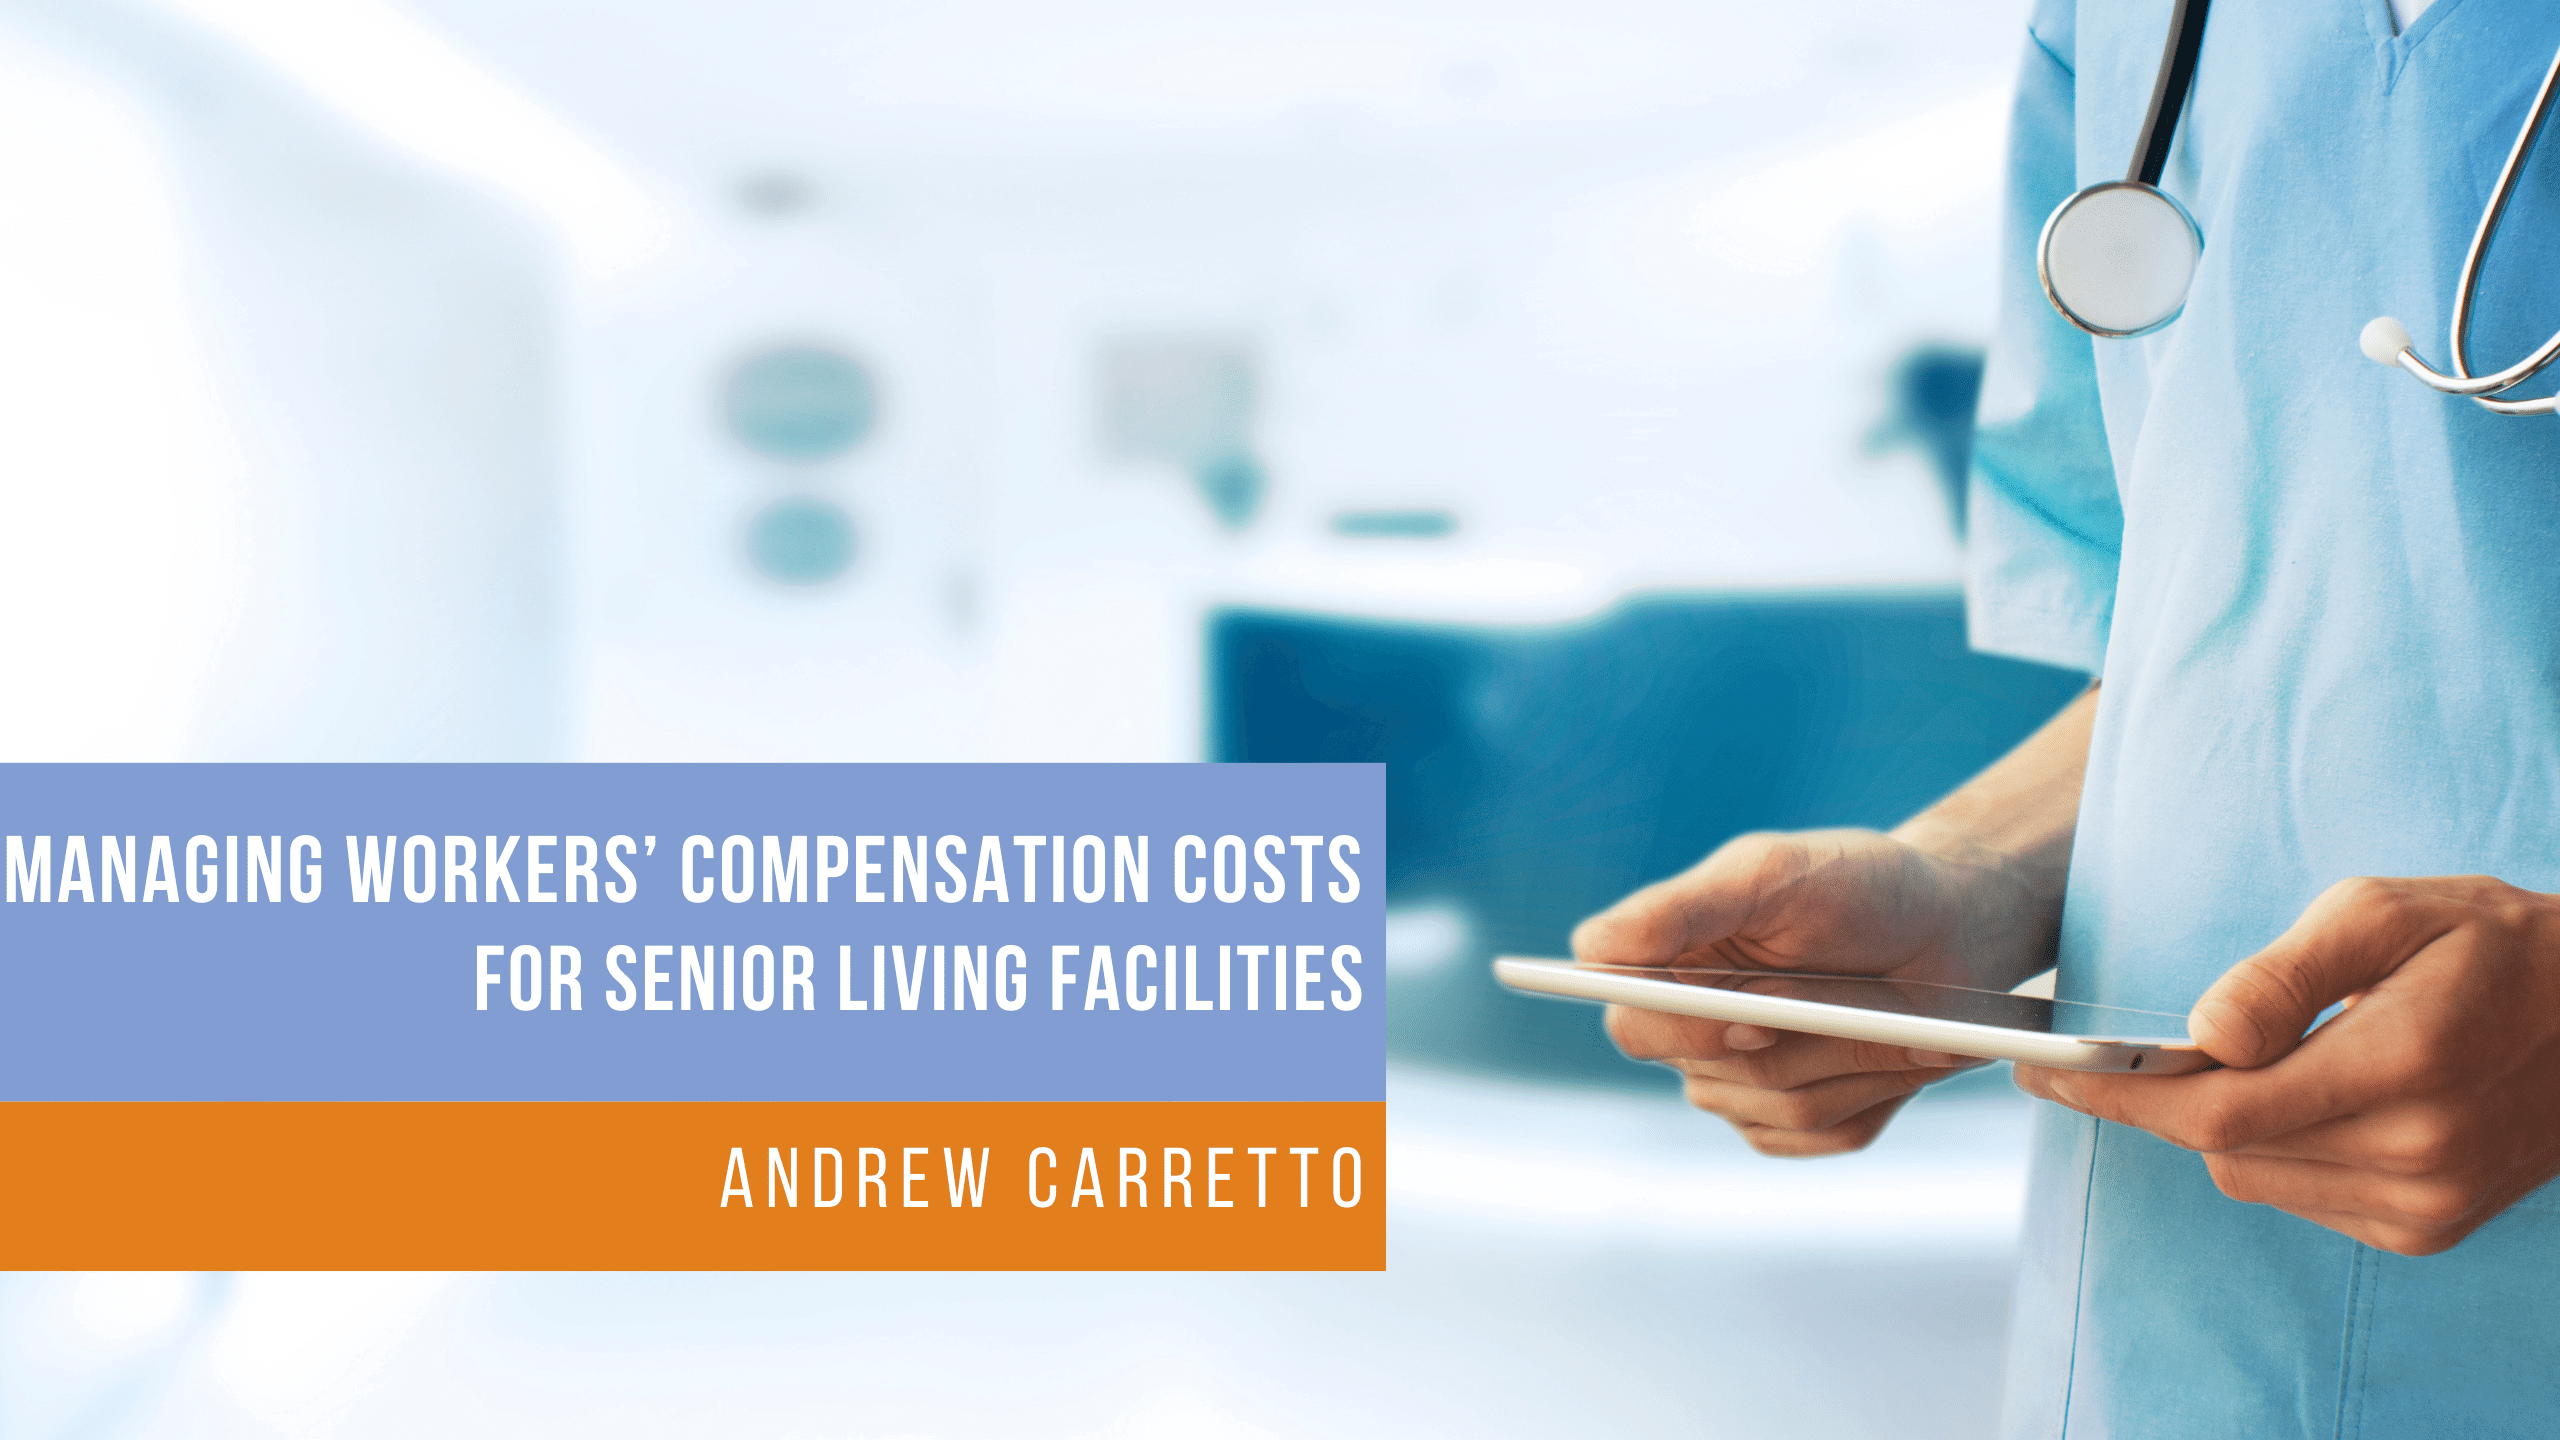 Managing Workers’ Compensation Costs for Senior Living Facilities